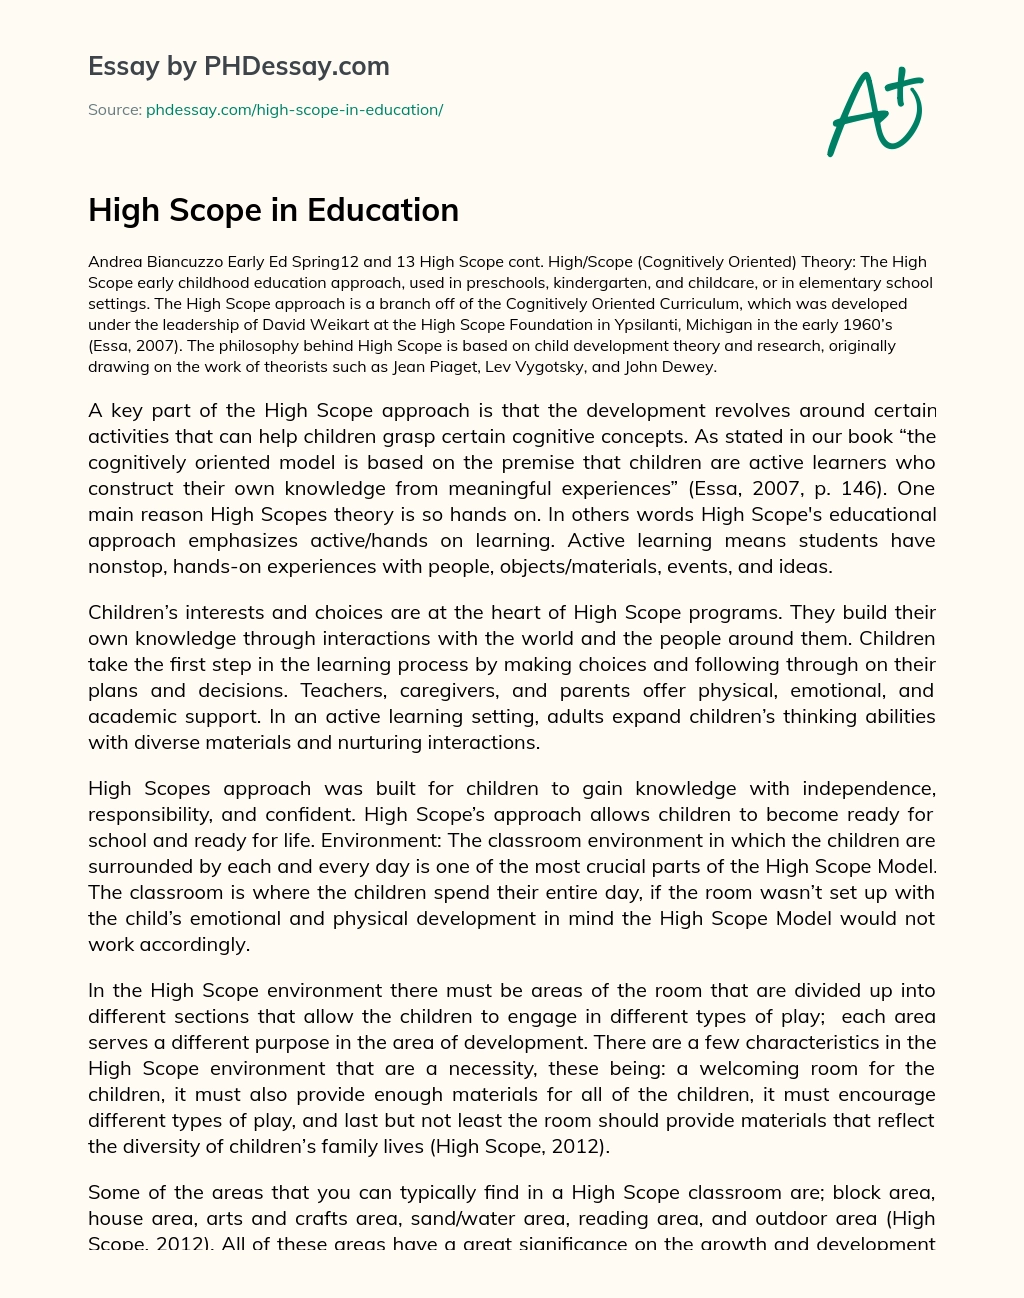 High Scope in Education essay